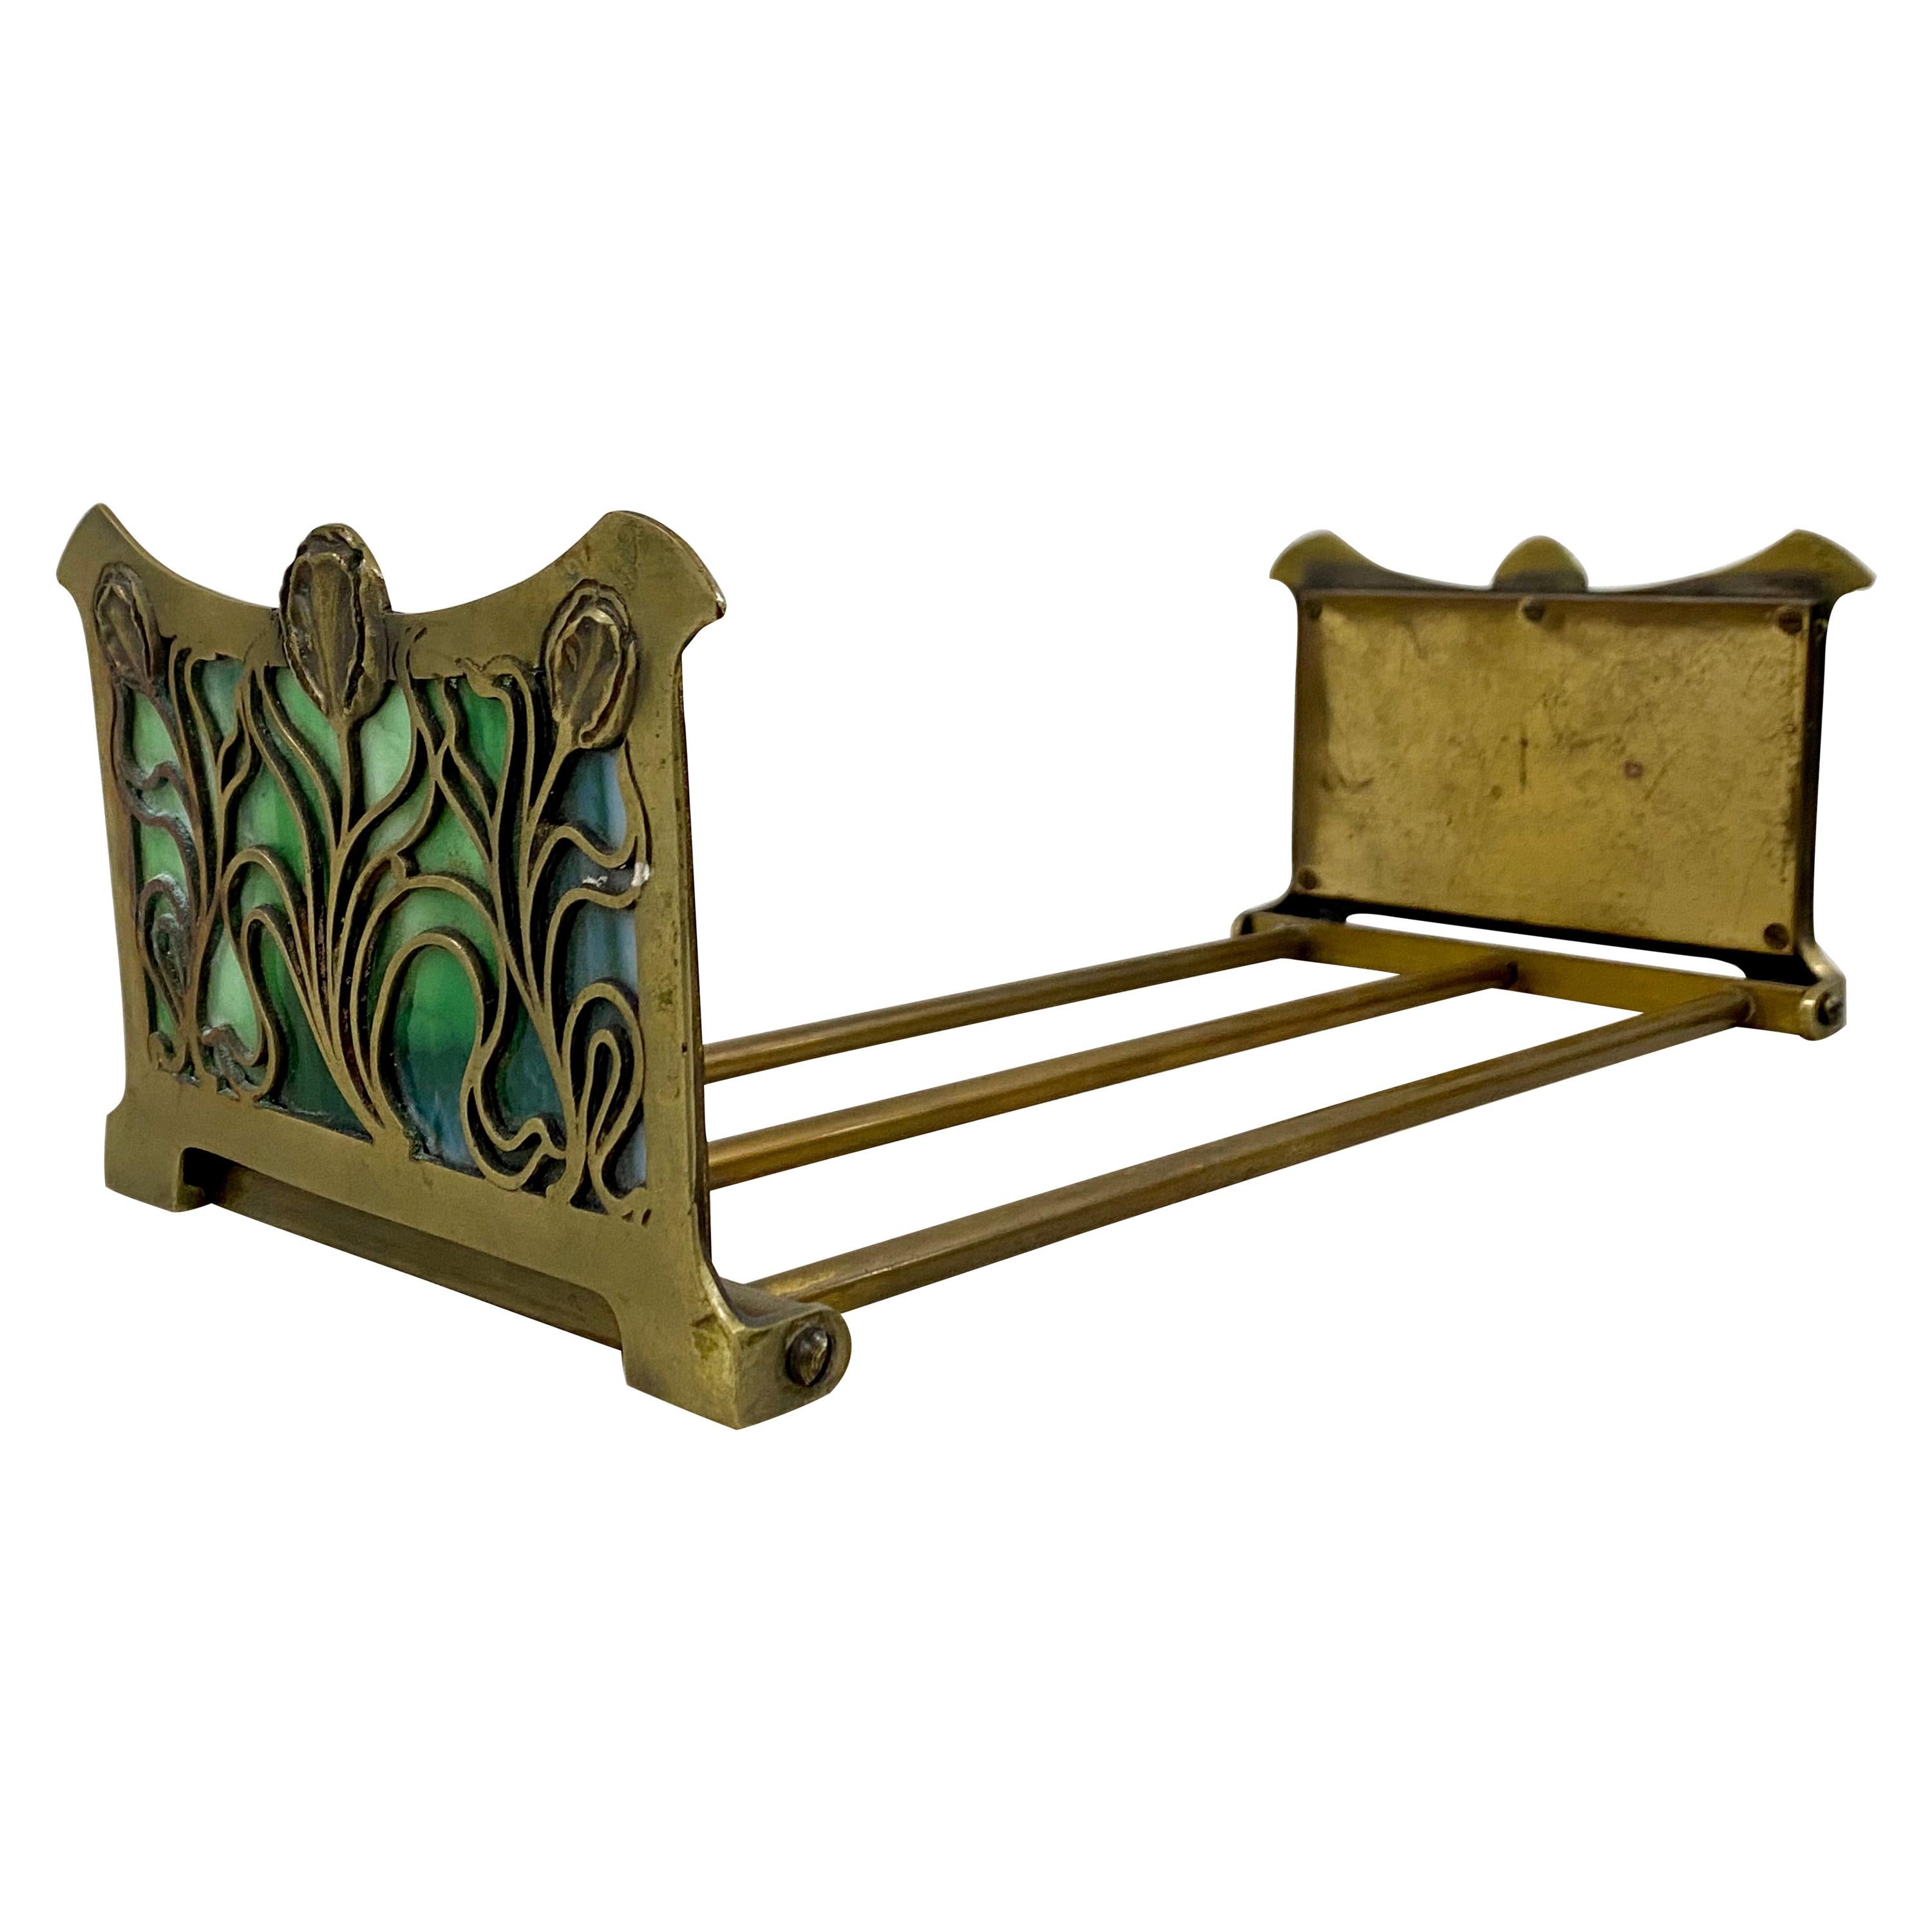 Early 20th Century Brass & Stained Glass Folding / Expanding Book Holder C.1910